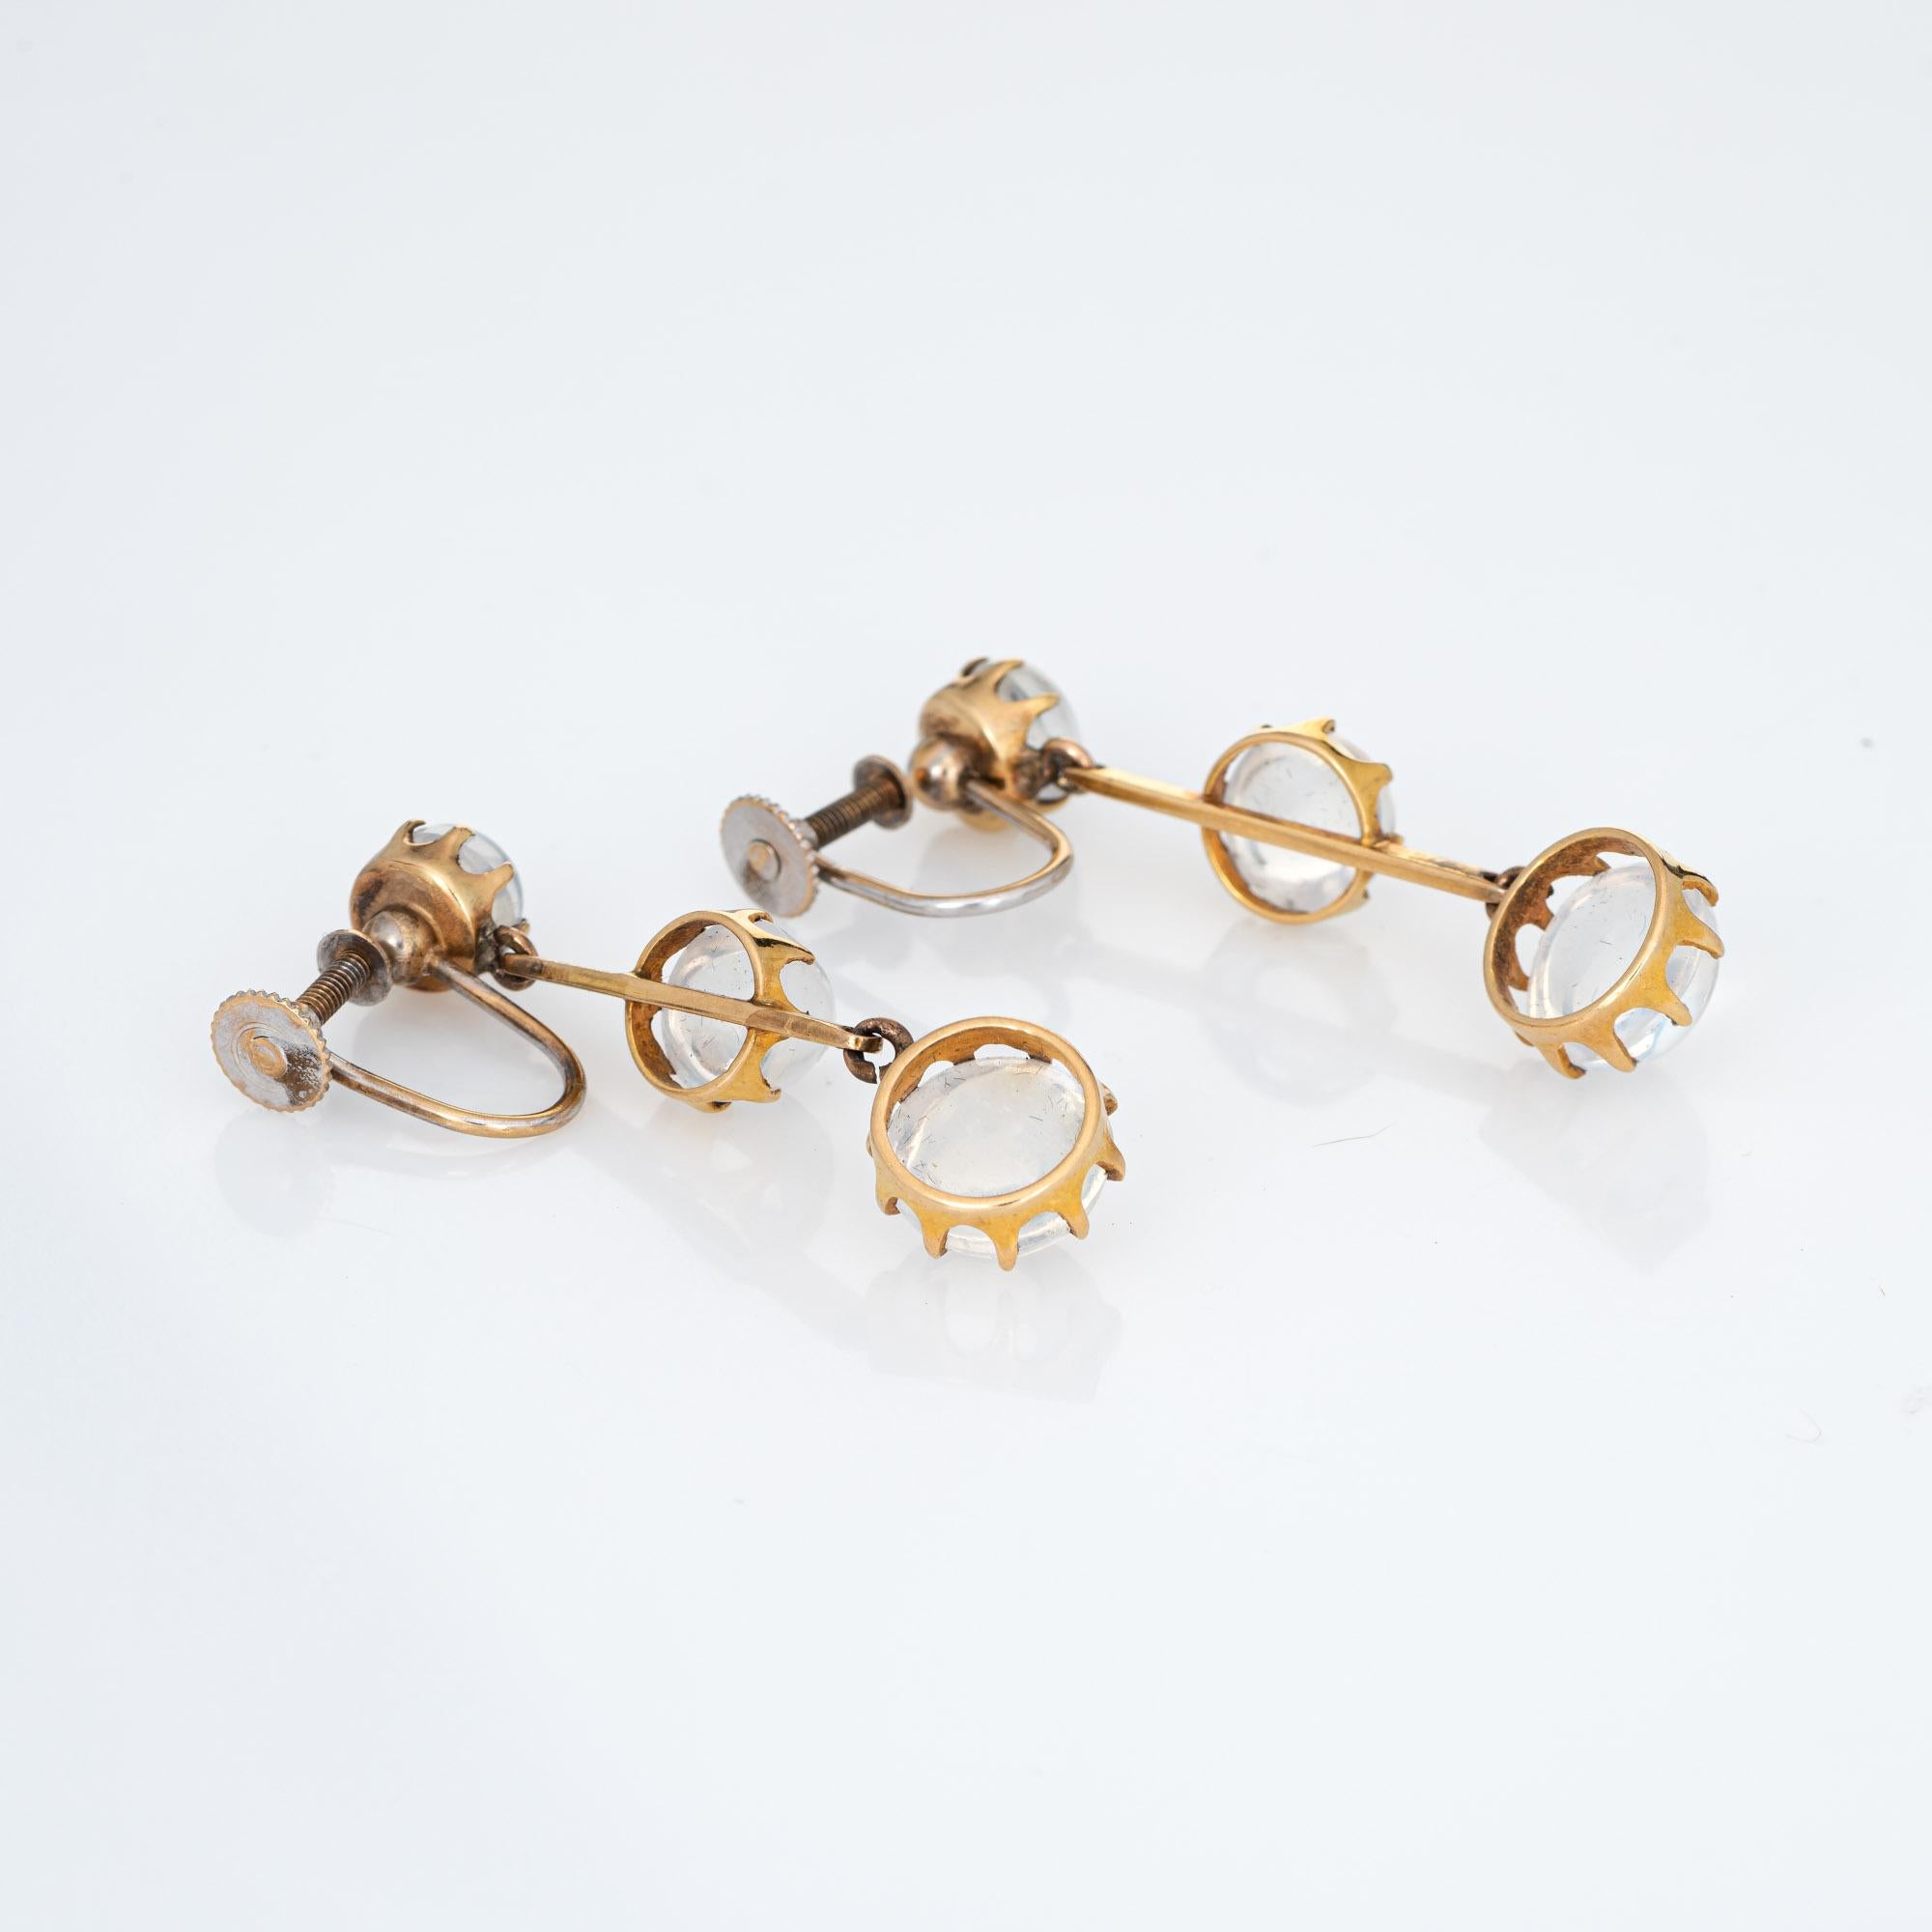 Finely detailed pair of antique Victorian moonstone drop earrings (circa 1880s to 1900s) crafted in 14k yellow gold. 

Six moonstones graduate in size from 7mm to 9mm. The moonstones are in very good condition and free of cracks or chips.  

The